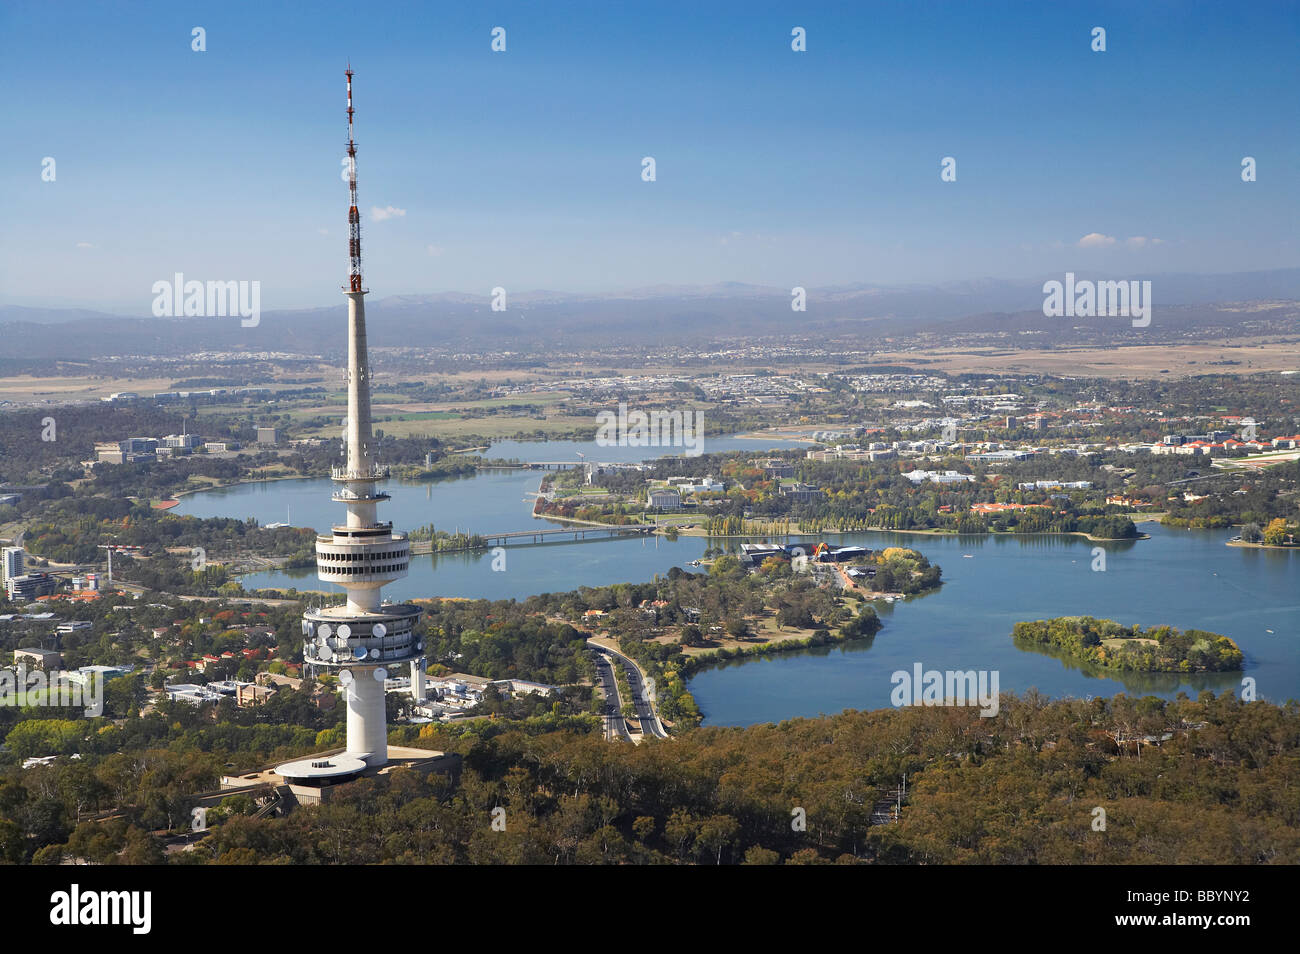 Telstra Tower Black Mountain and Lake Burley Griffin Canberra ACT Australia aerial Stock Photo